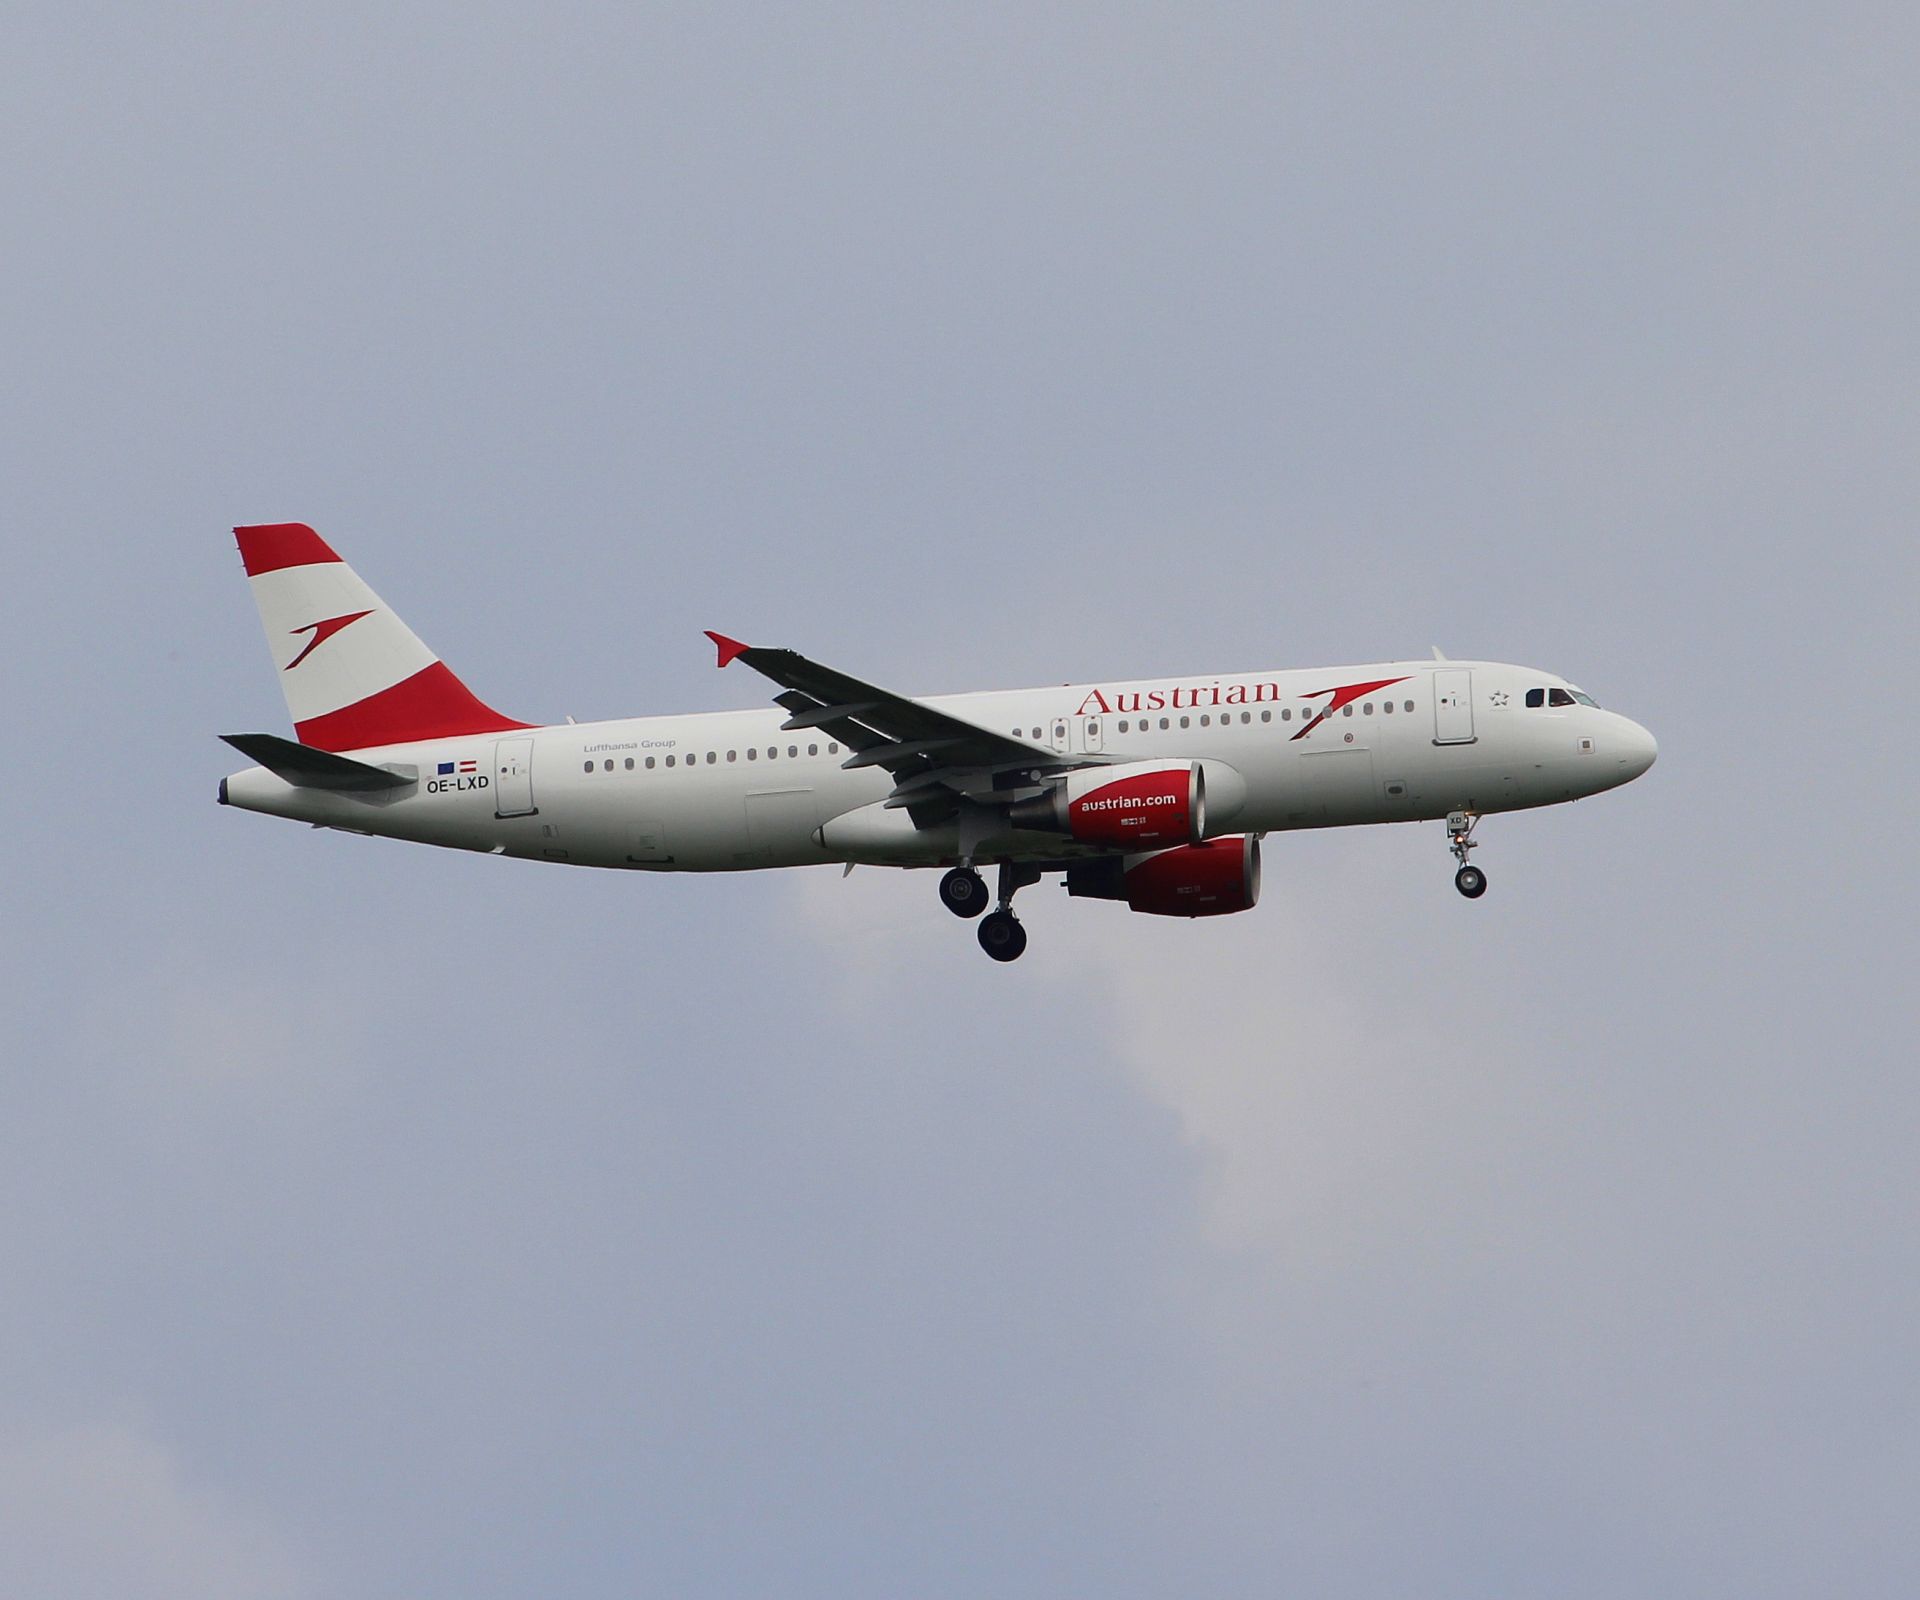 OE-LXD Airbus A320-216